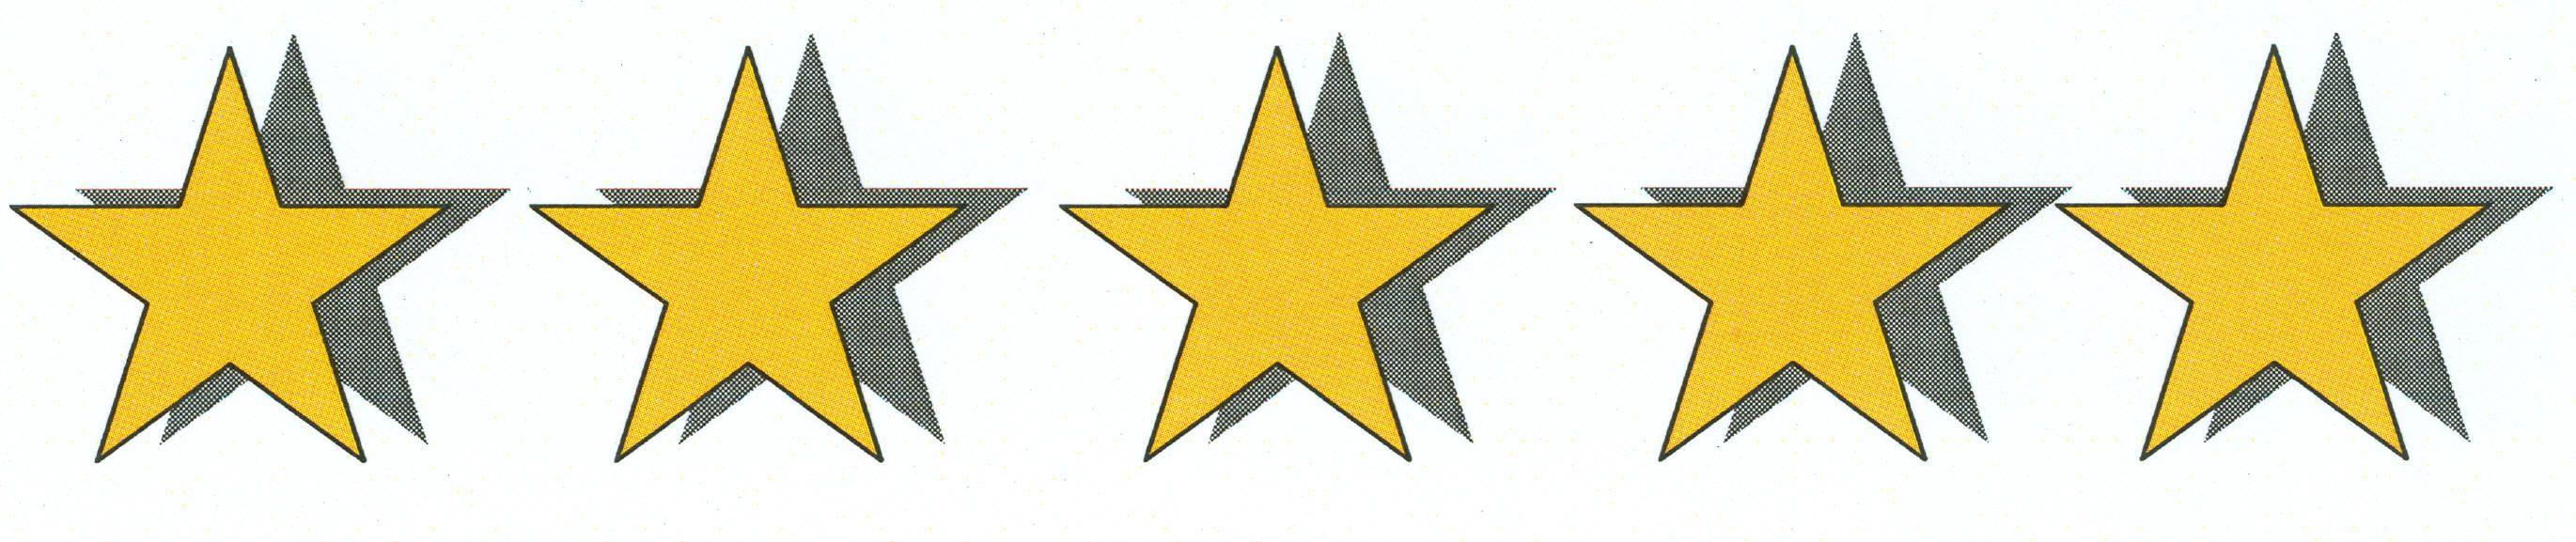 Review Stars Logo - Review Stars 5 Stars And Swagger